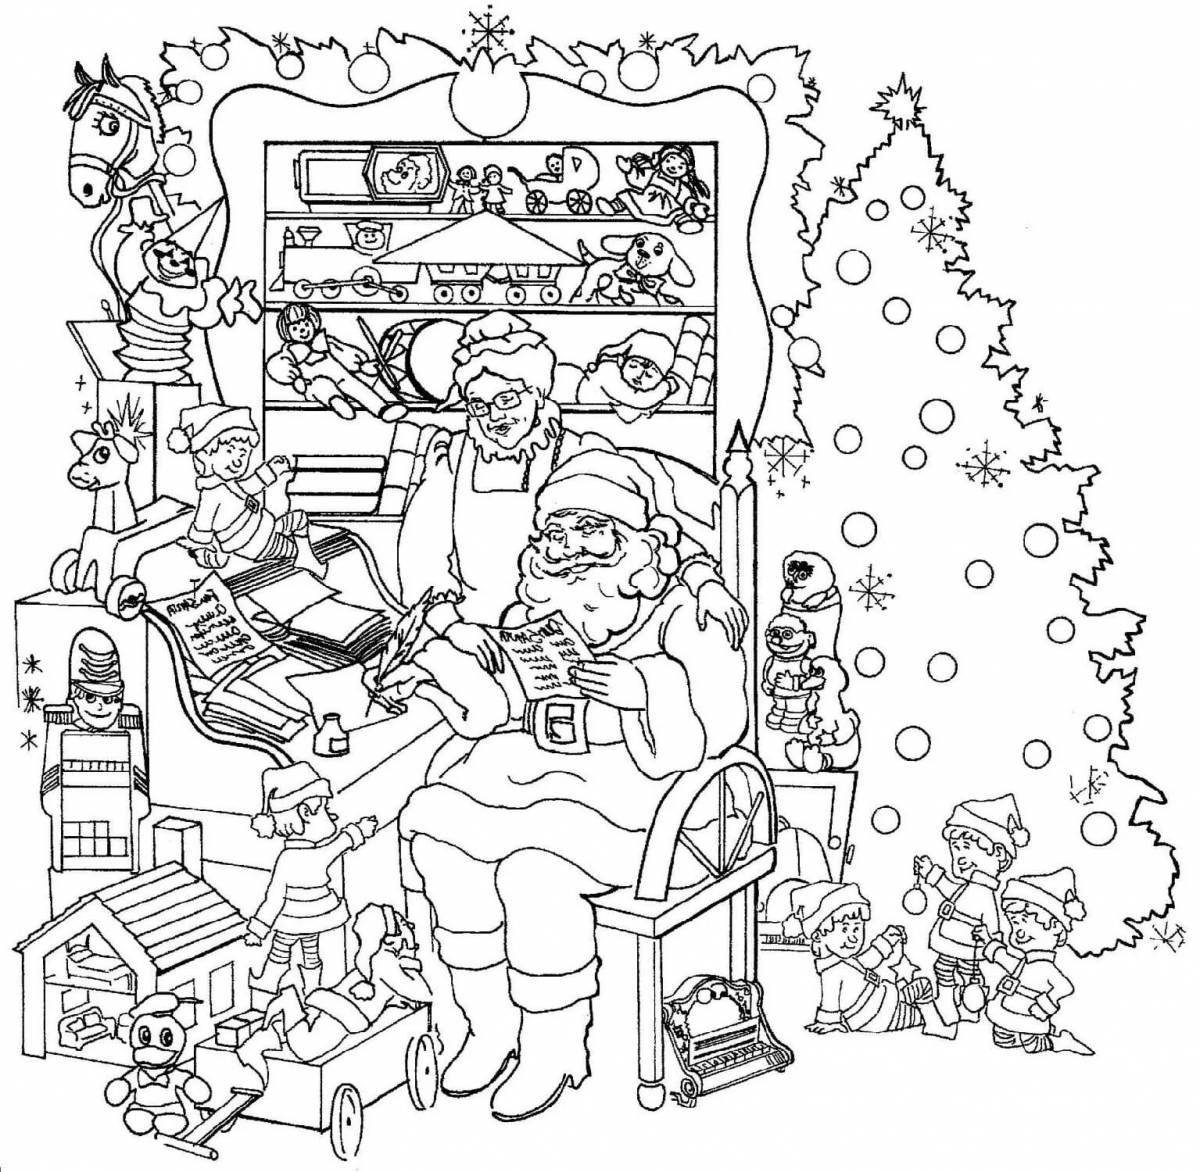 Fabulous Christmas coloring book for adults